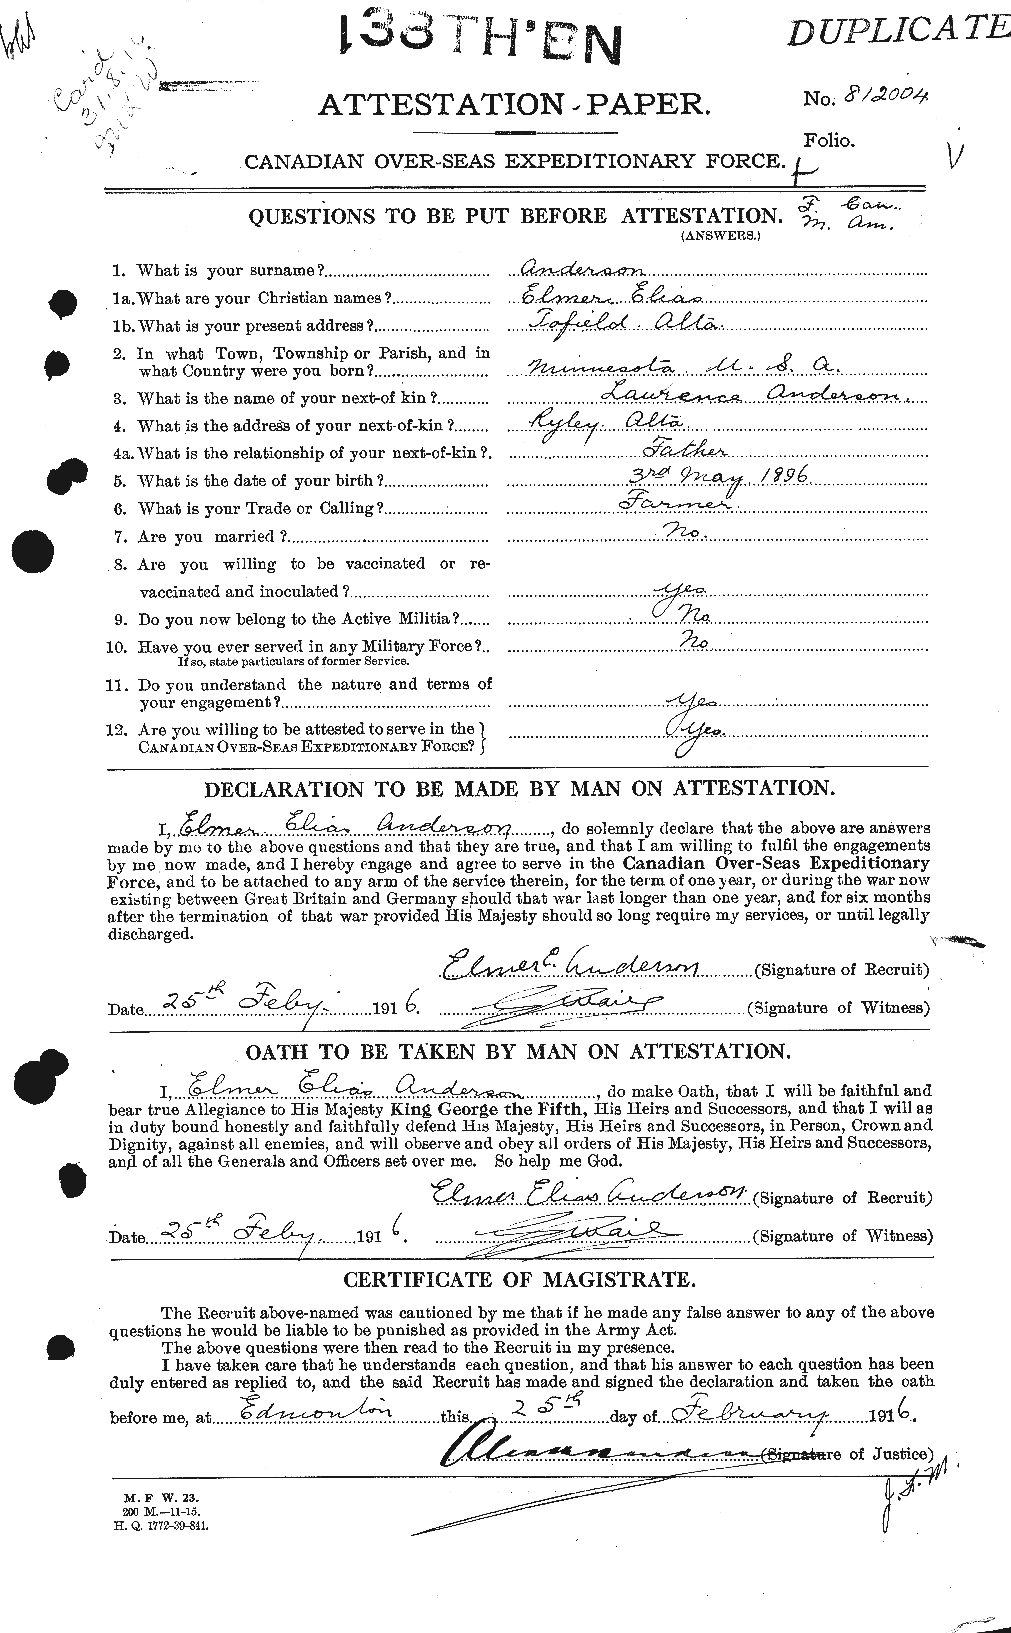 Personnel Records of the First World War - CEF 209914a